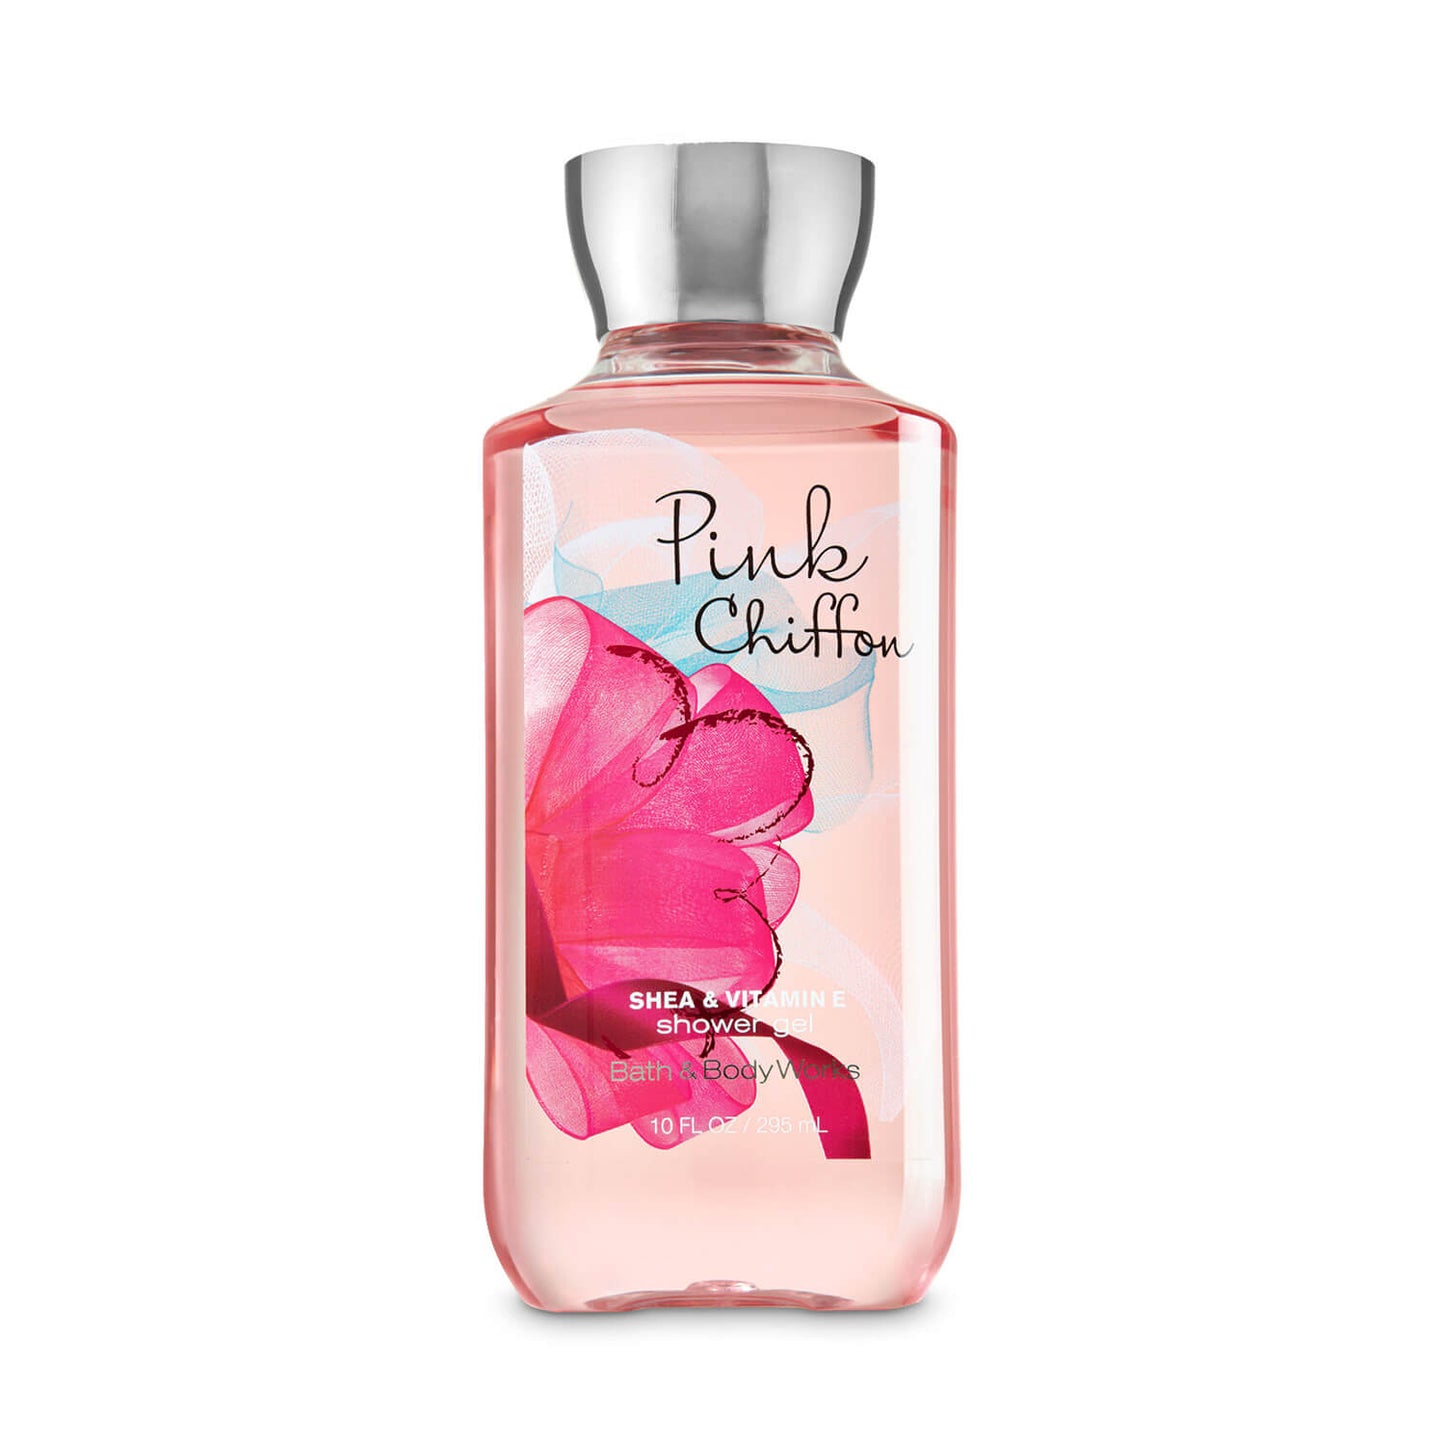 bath and body shower gel pink chiffon available for delivery in Pakistan